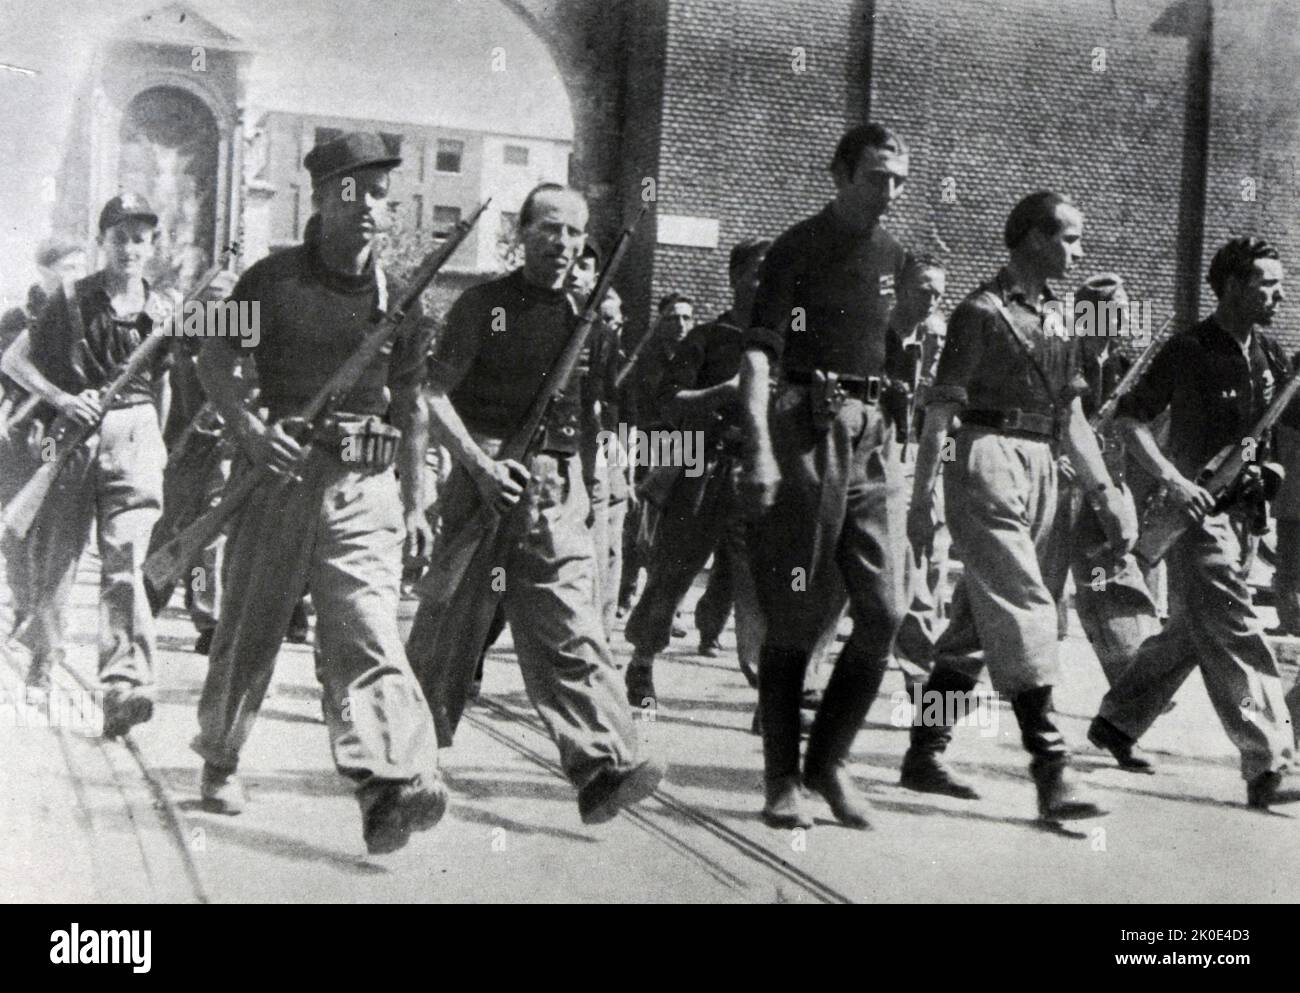 Auxiliary Corps of the Black Shirts' Action Squads, known as the Black Brigades (Brigate Nere), a Fascist paramilitary groups, organized and run by the Republican Fascist Party (Partito Fascista Repubblicano, PFR) operating in the Italian Social Republic (in northern Italy), during the final years of World War II, and after the signing of the Italian Armistice in 1943. Stock Photo